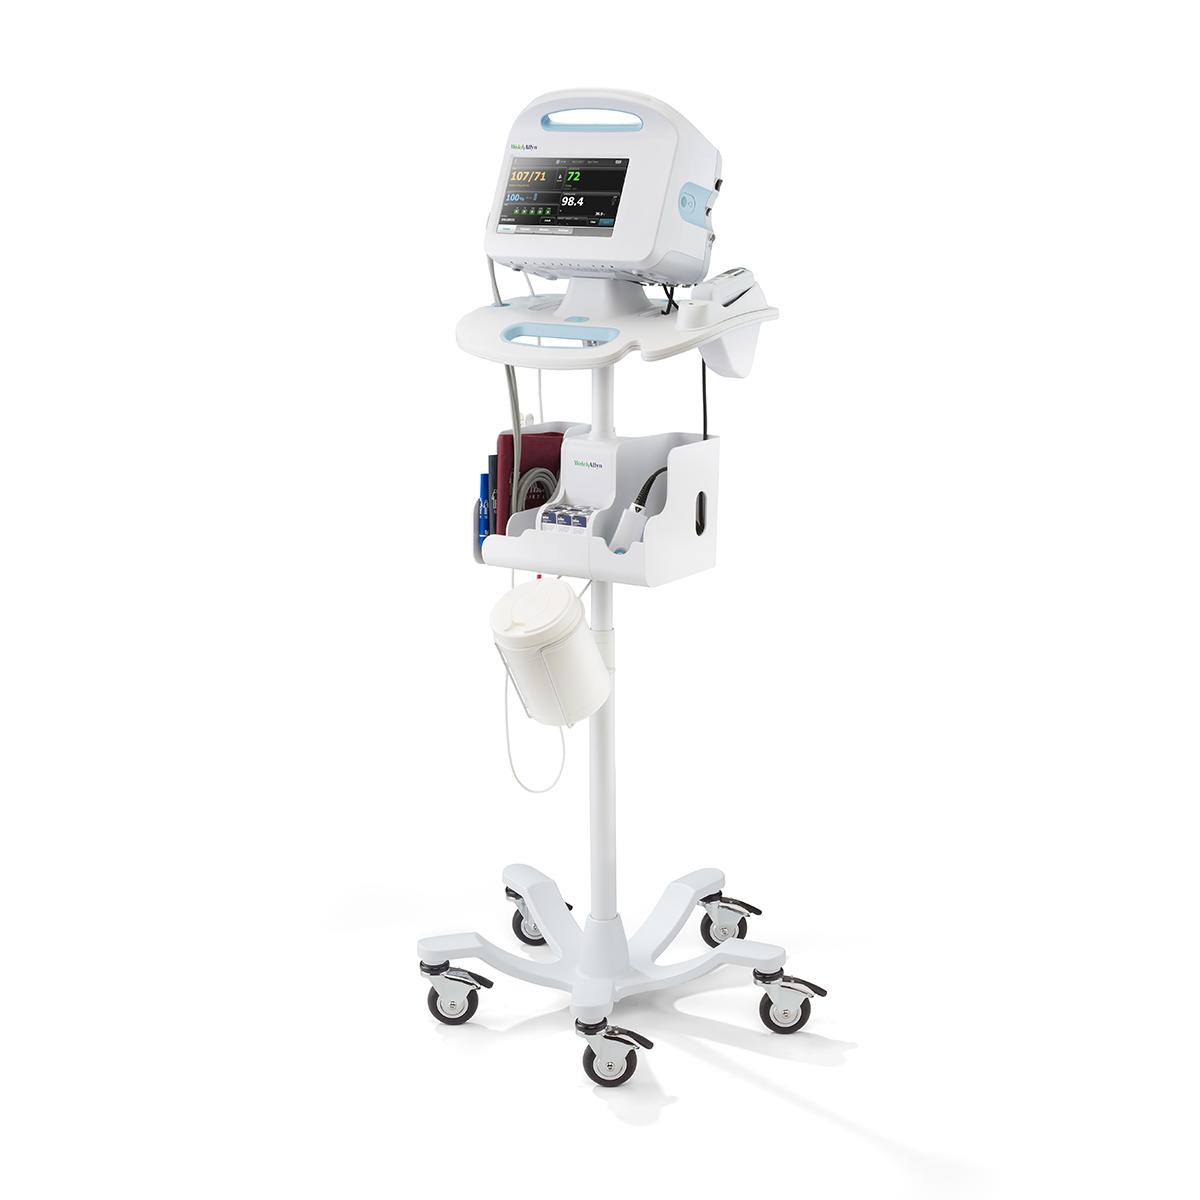 Welch Allyn Connex 6700 Series Vital Signs Monitor with Nellcor SpO2 and Braun ThermoScan PRO 6000